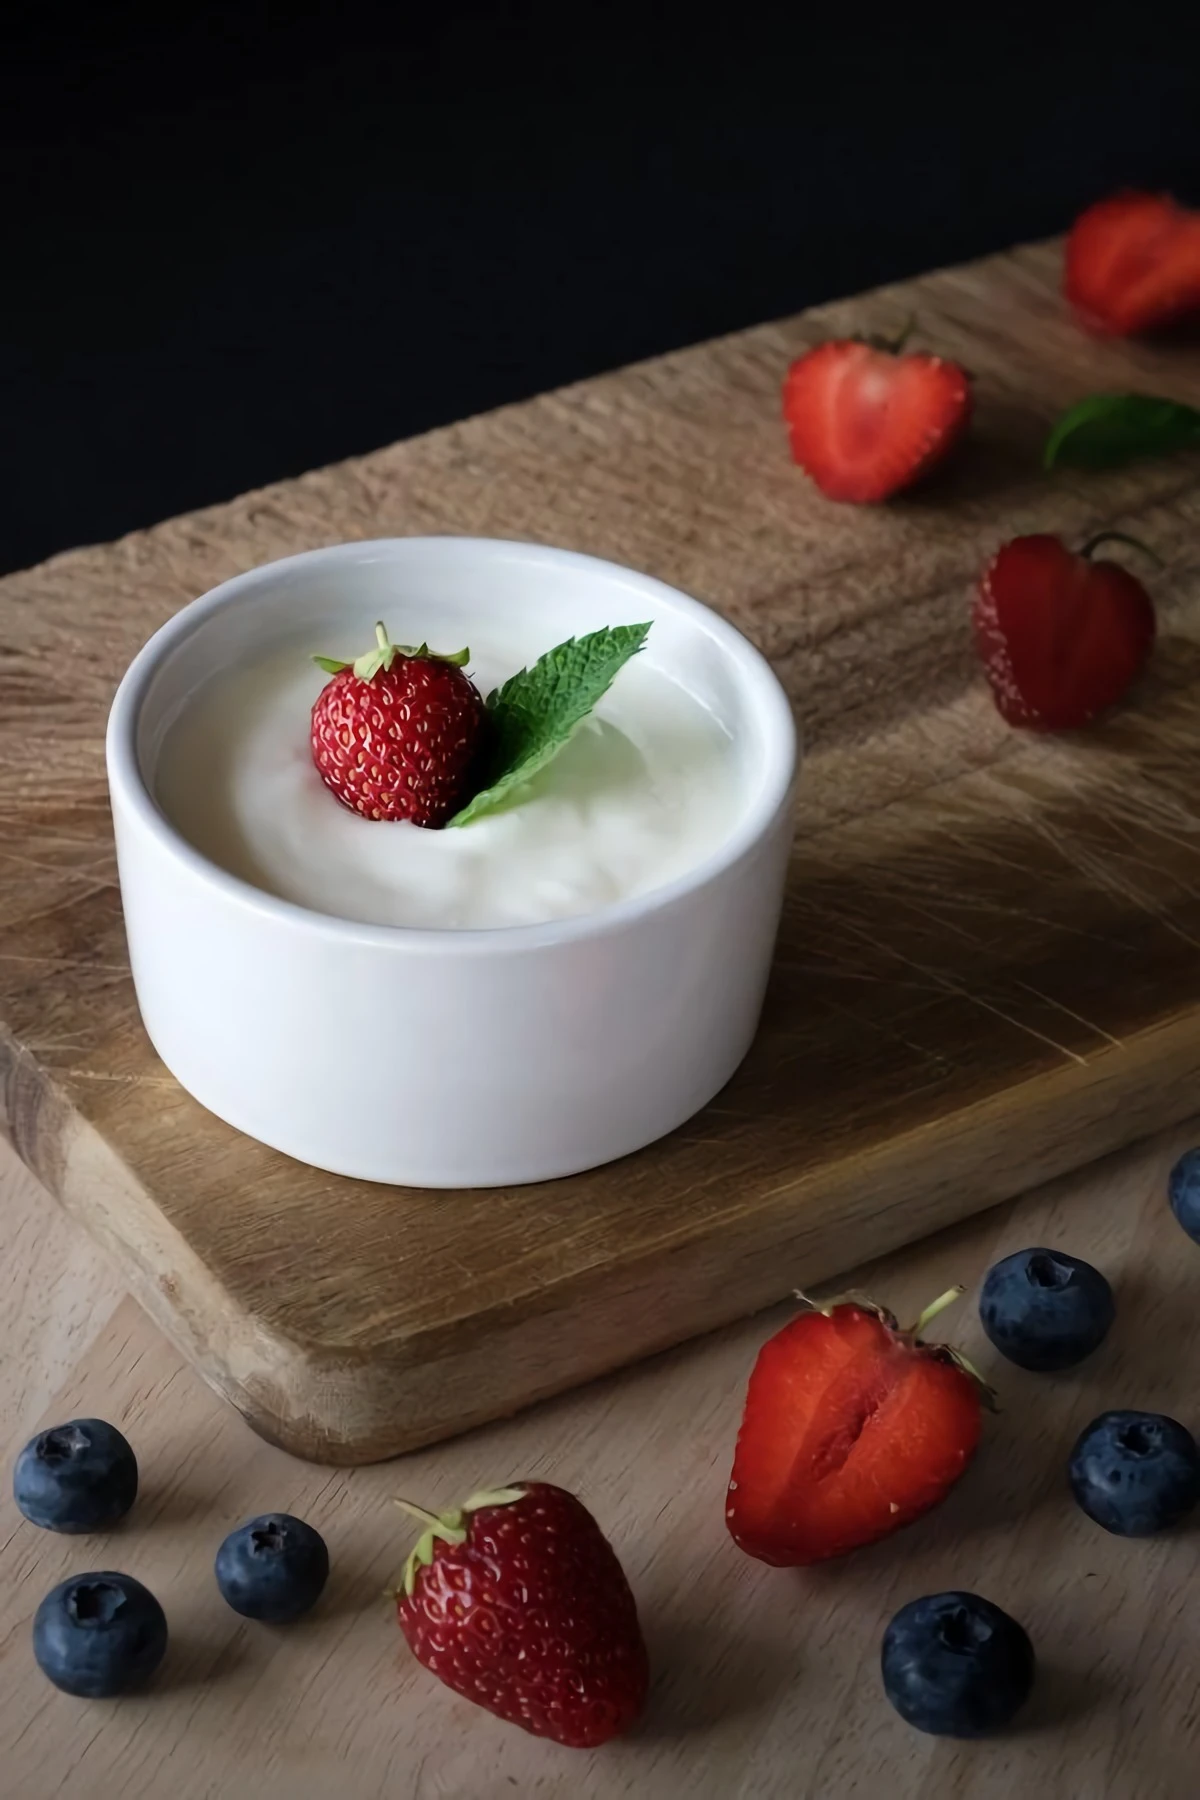 yogurt in a white bowl with berries